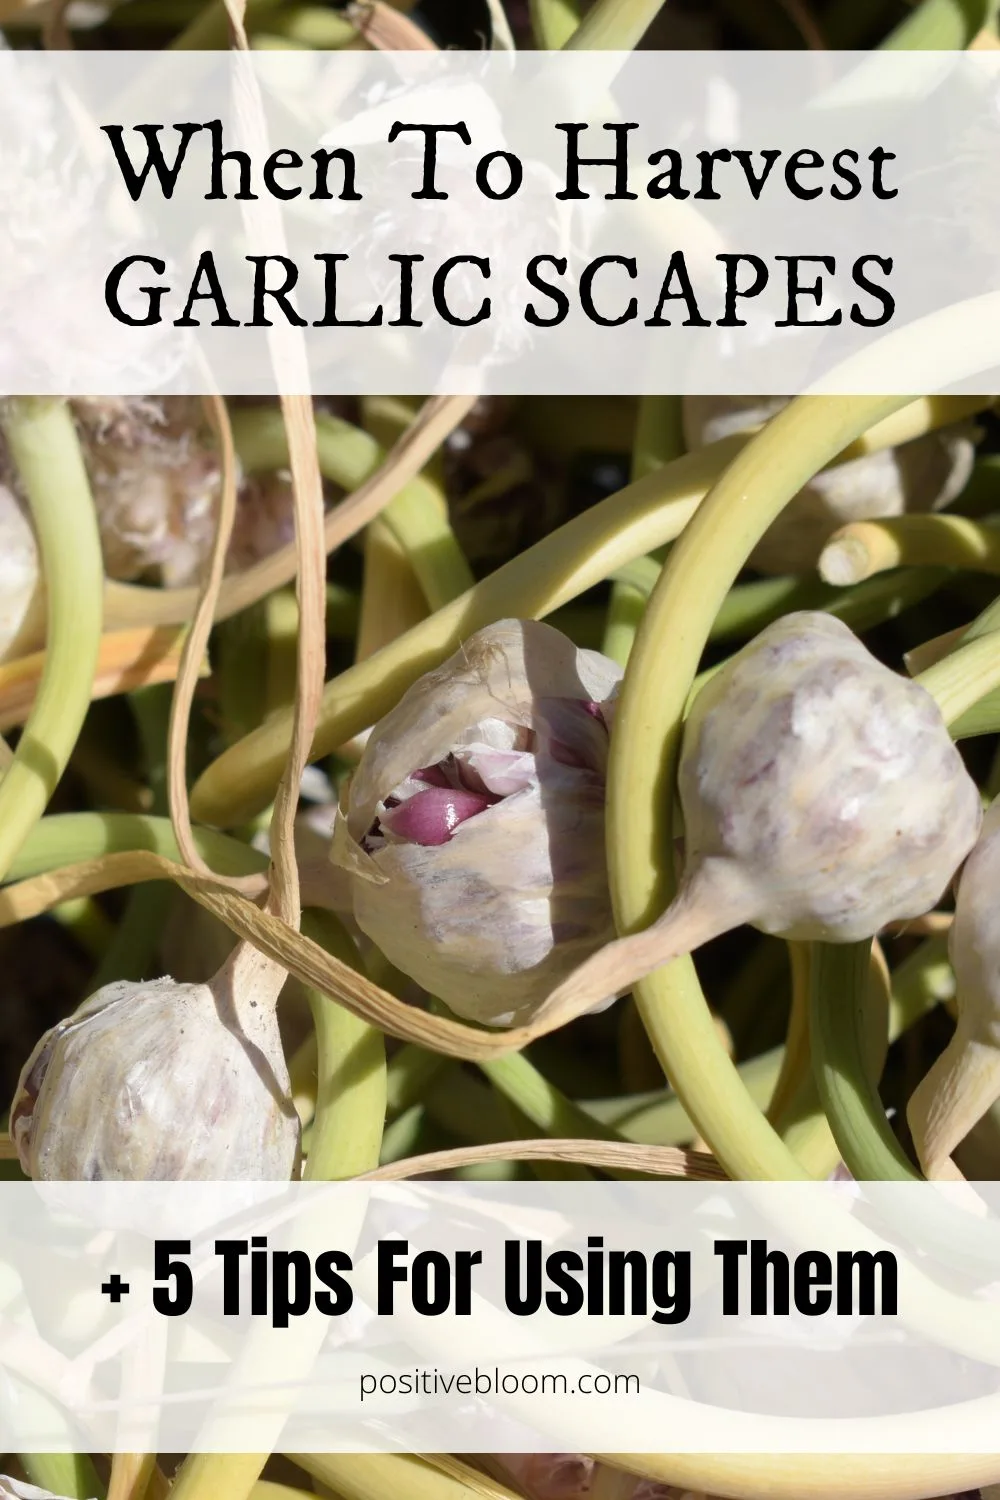 When To Harvest Garlic Scapes + 5 Tips For Using Them Pinterest